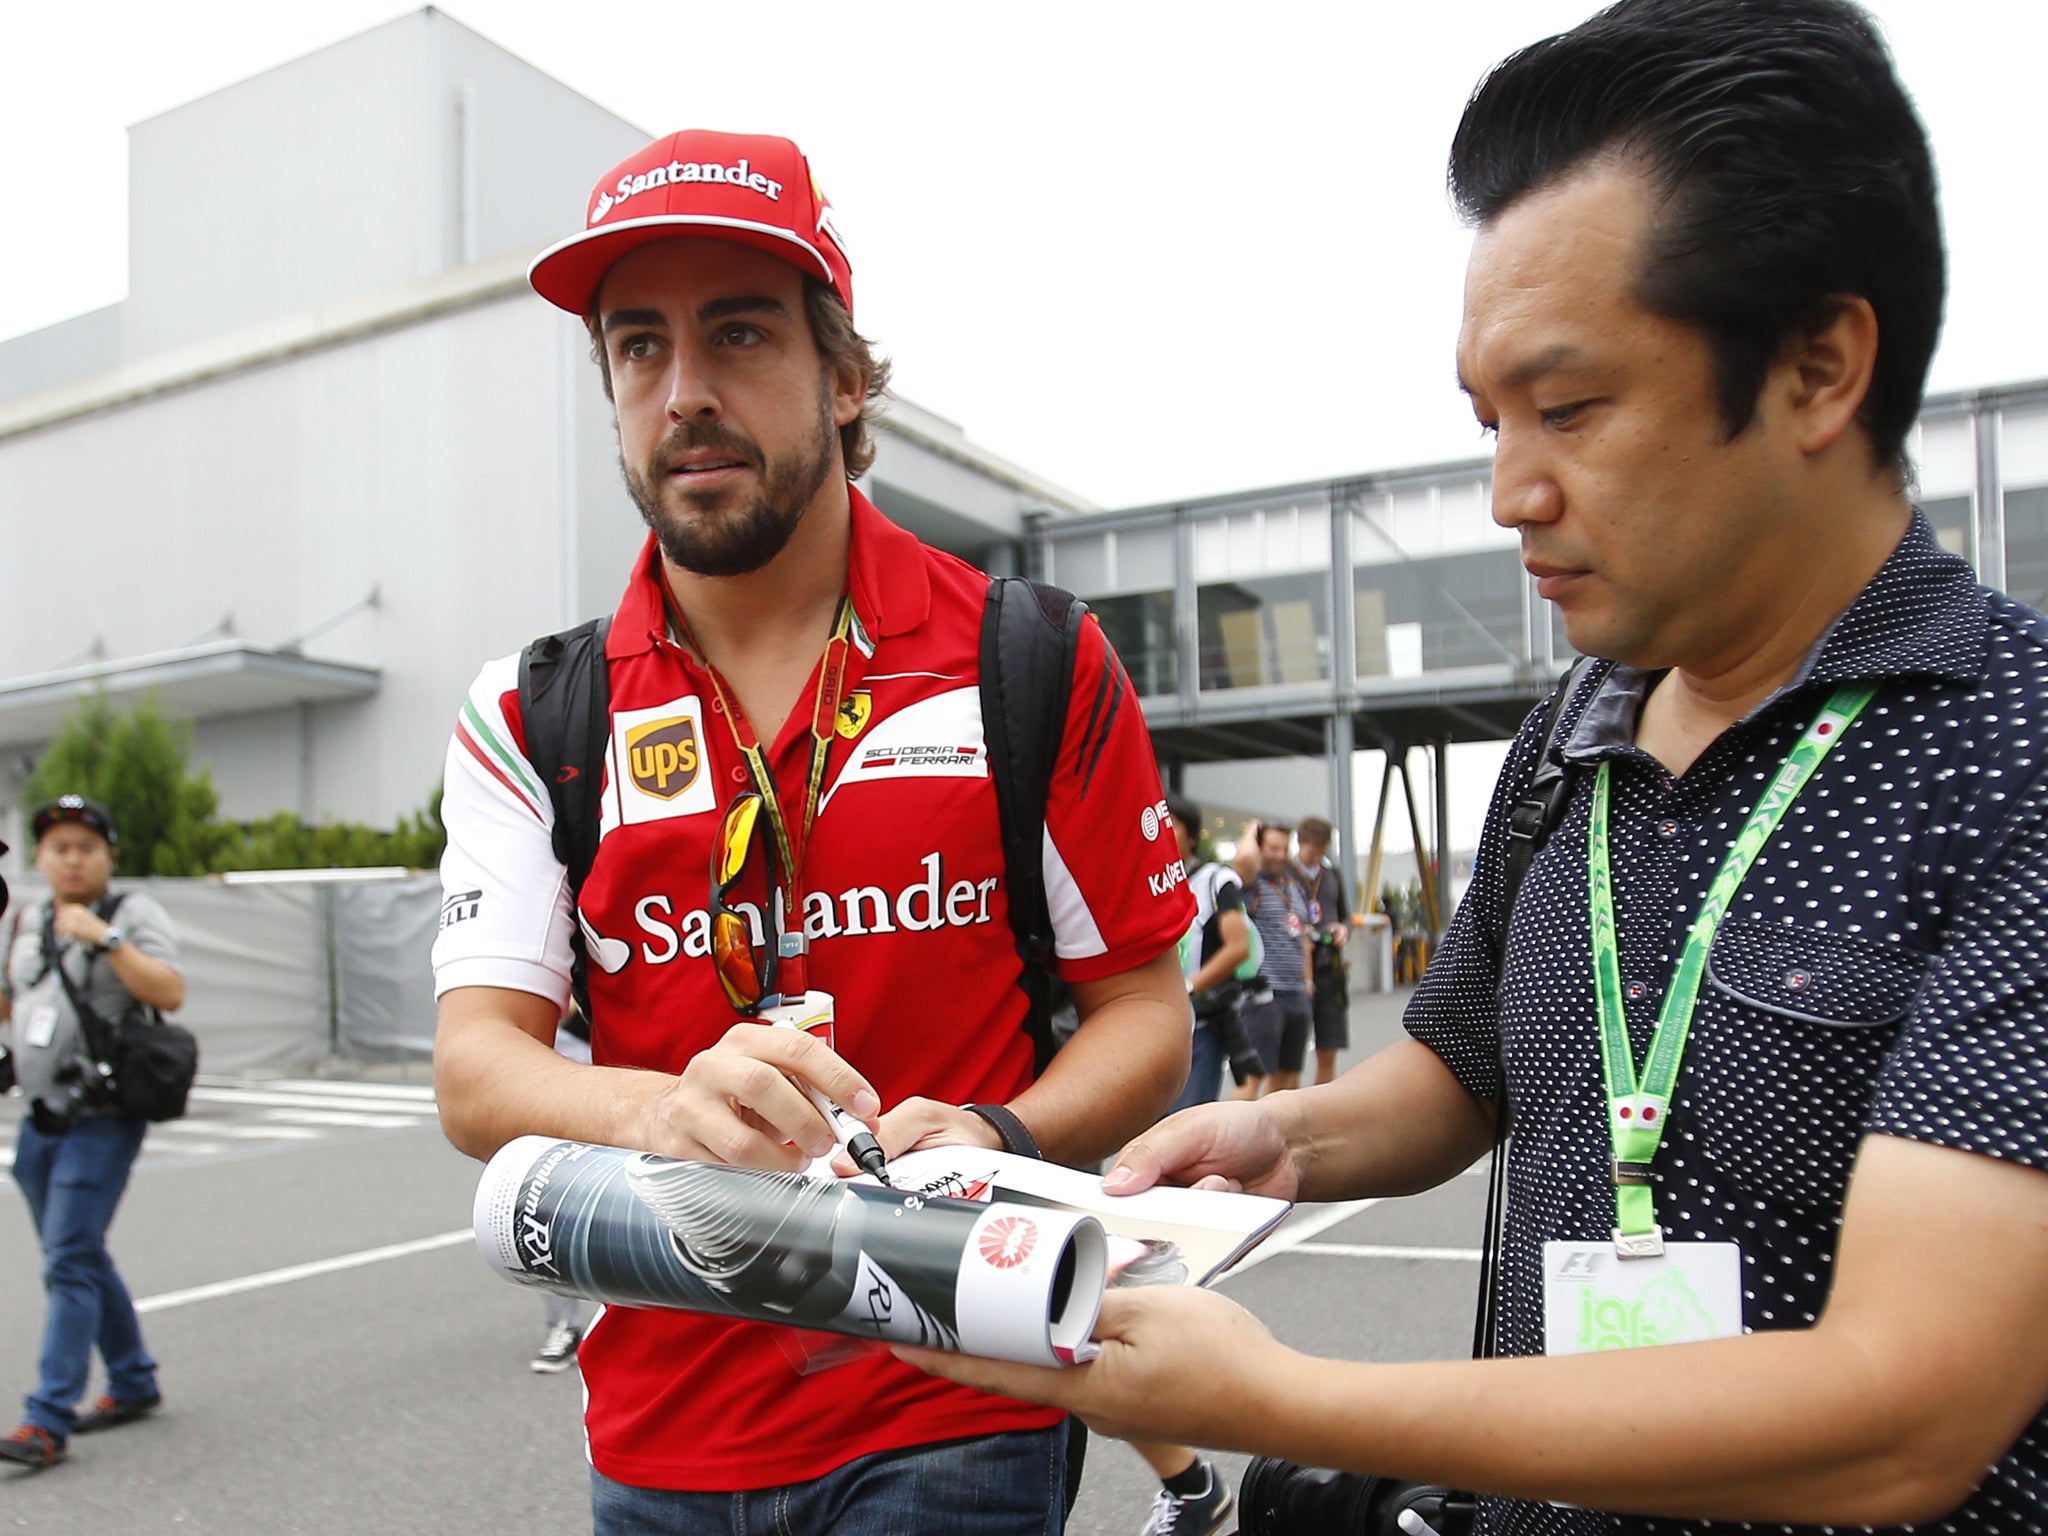 Fernando Alonso signs an autograph for a fan as he arrives at Suzuka to prepare for Sunday’s Japanese Grand Prix